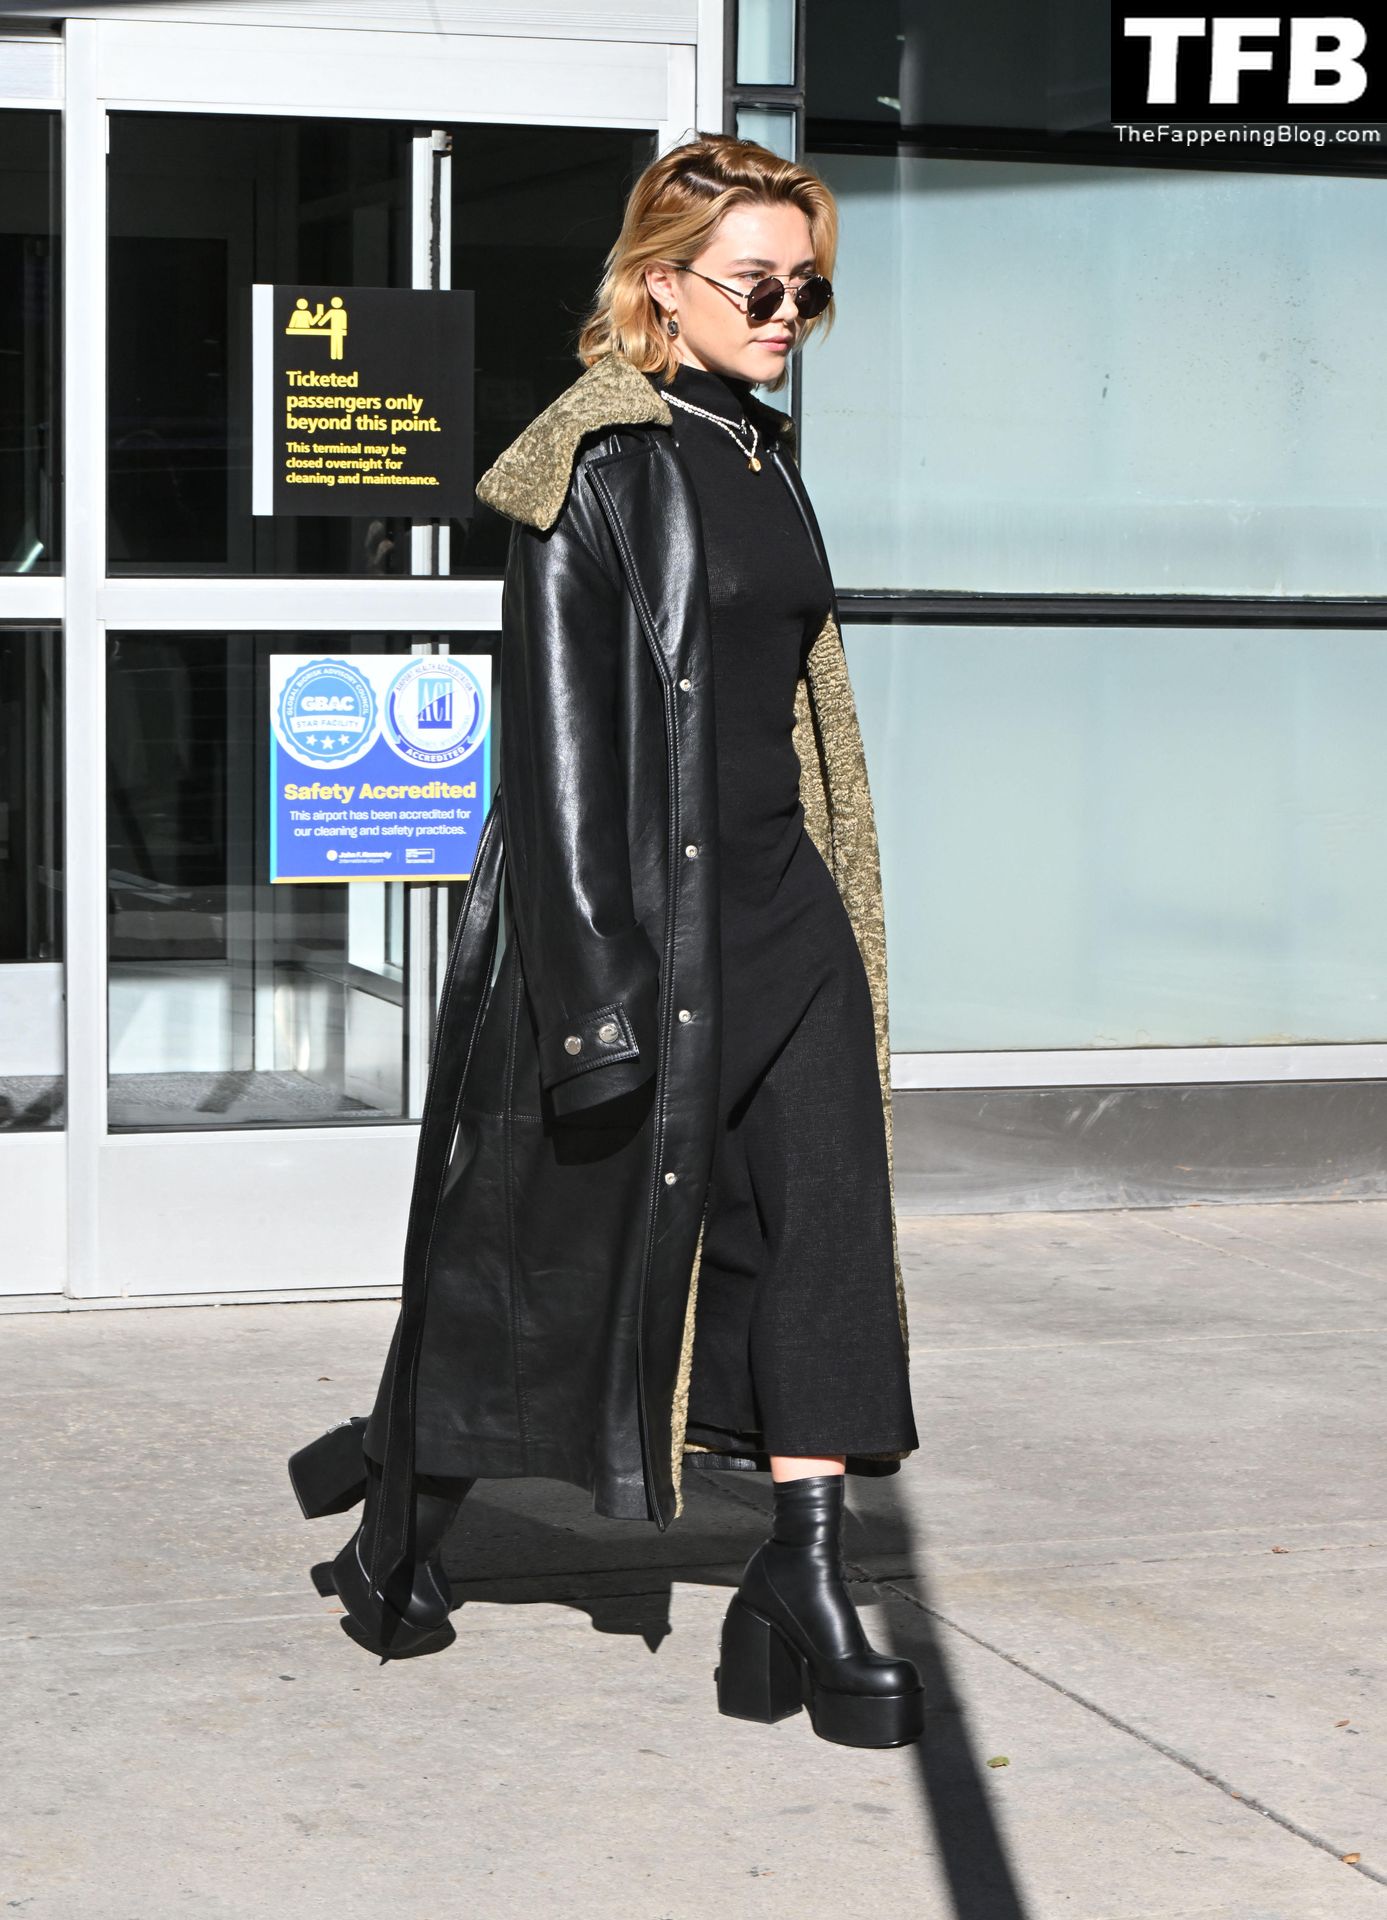 Florence Pugh Pokies The Fappening Blog 21 - Florence Pugh Shows Off Her Pokies at JFK airport in NYC (31 Photos)